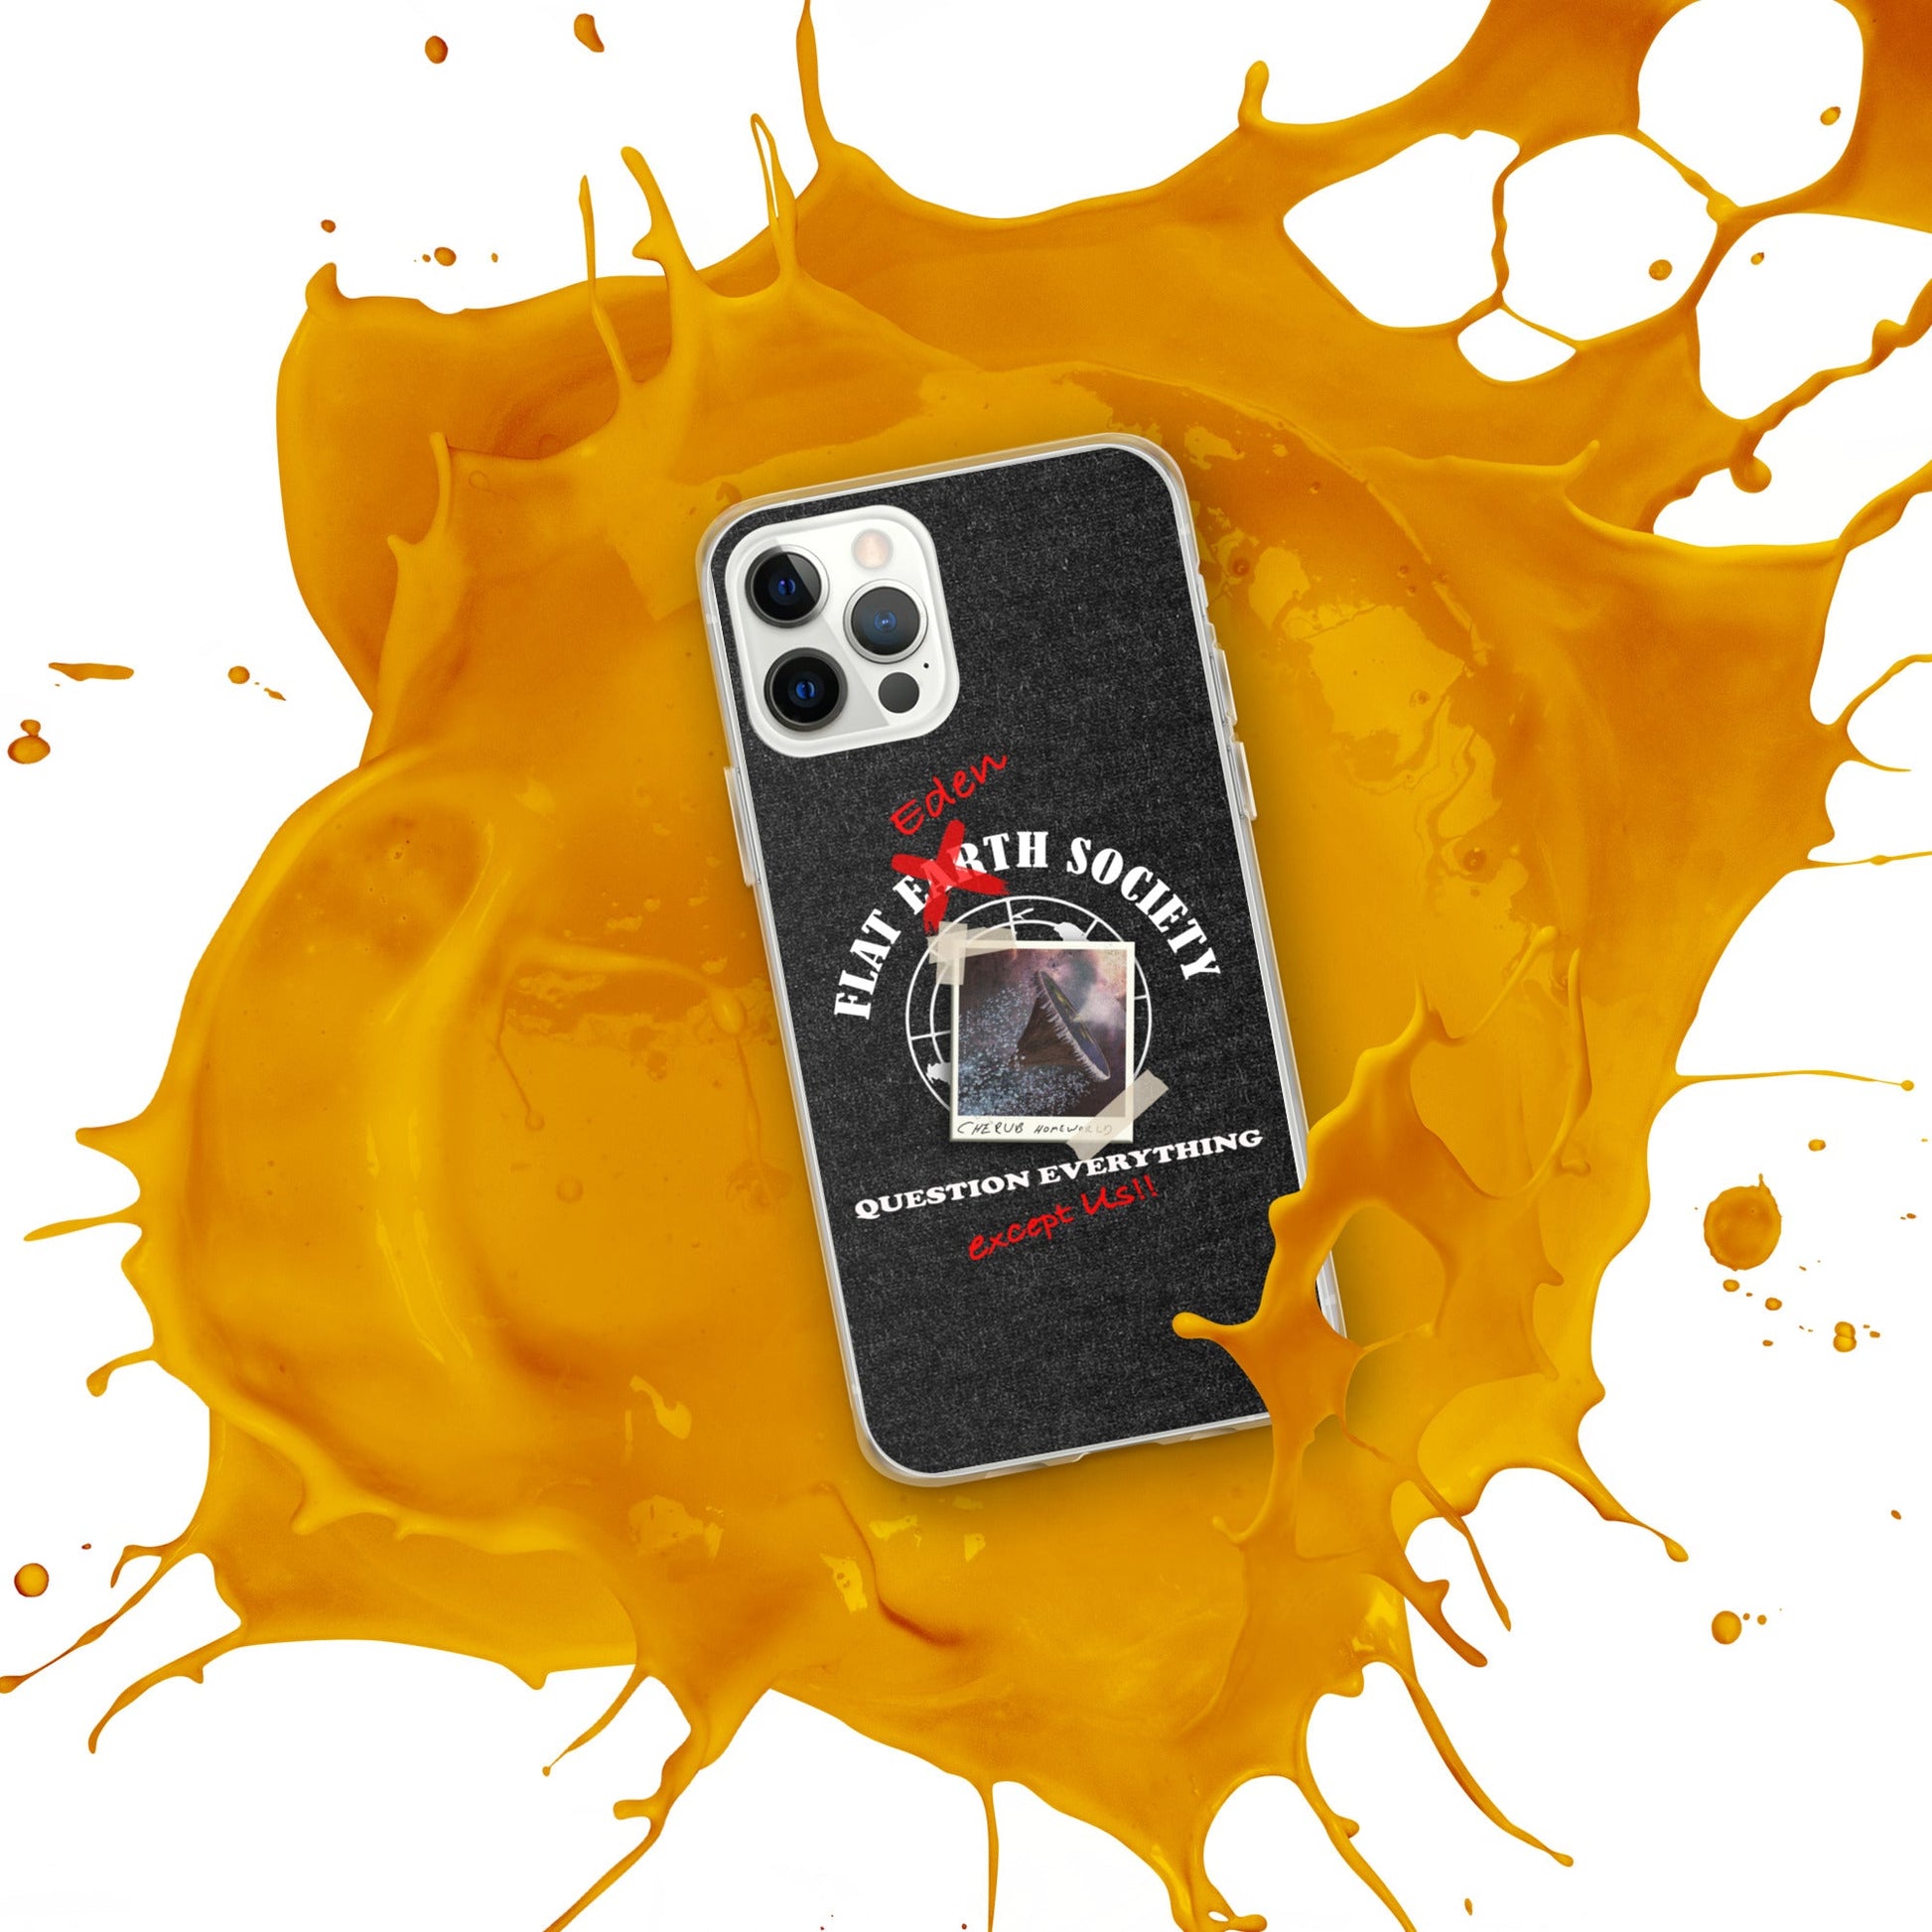 iPhone Case | Intergalactic Space Force 2 | Flat Eden Society - Spectral Ink Shop - Mobile Phone Cases -9780728_11808